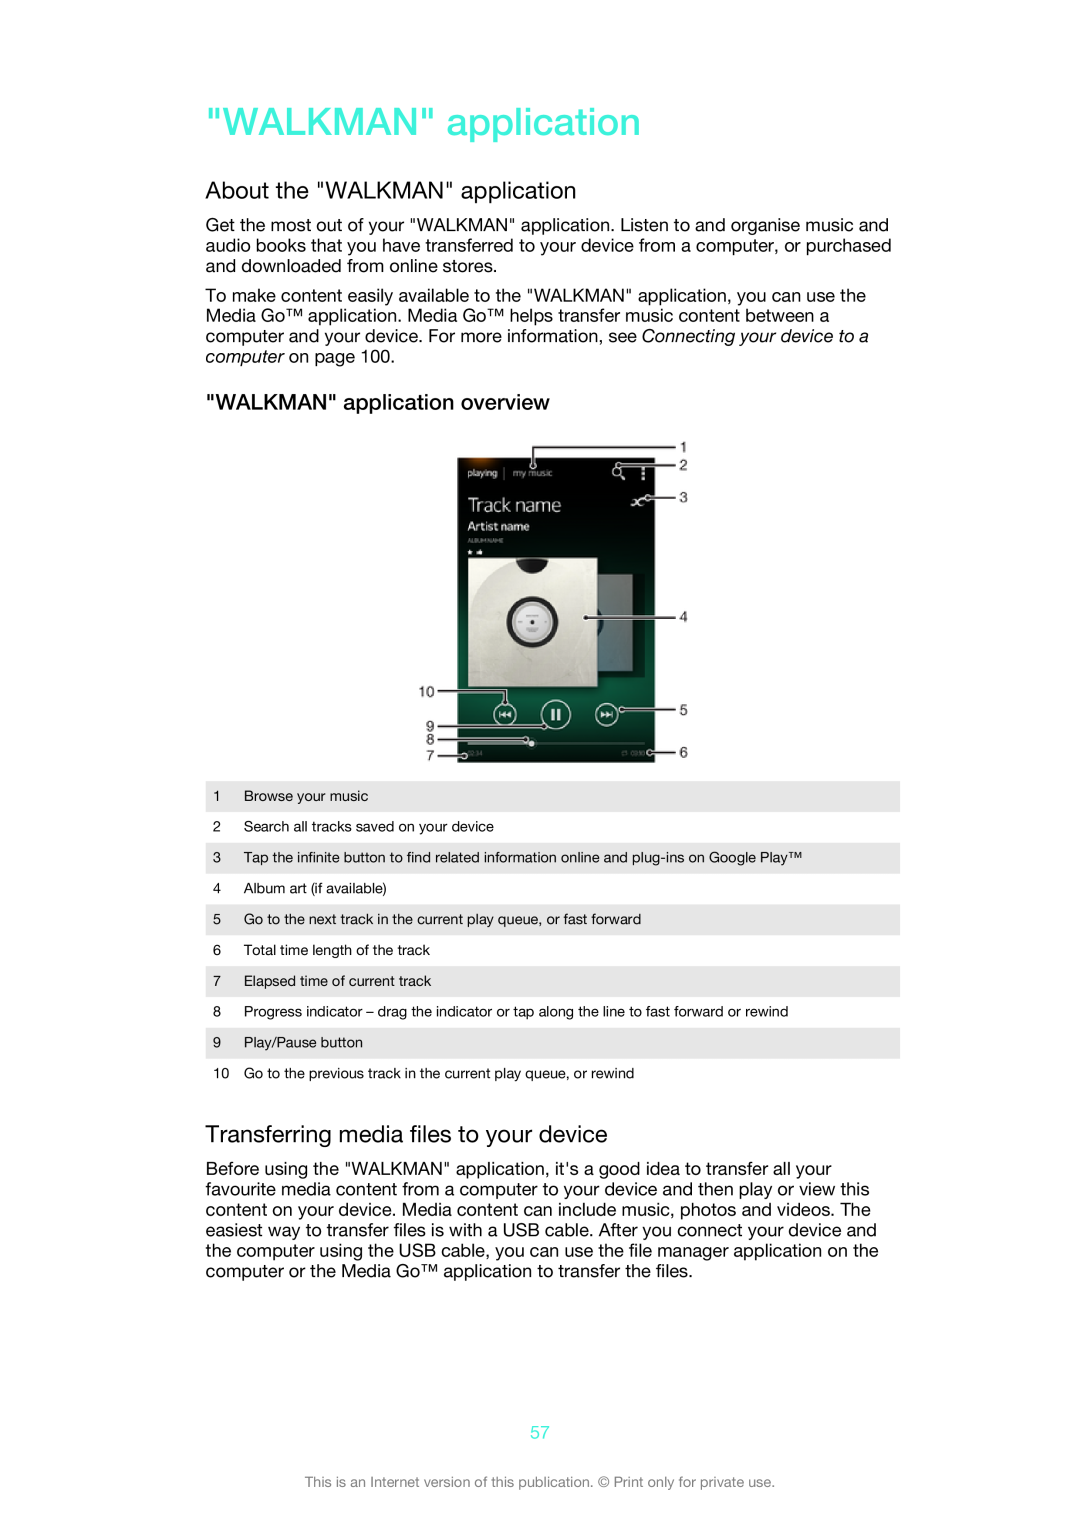 Sony ST27i, ST27A About the WALKMAN application, Transferring media files to your device, WALKMAN application overview 